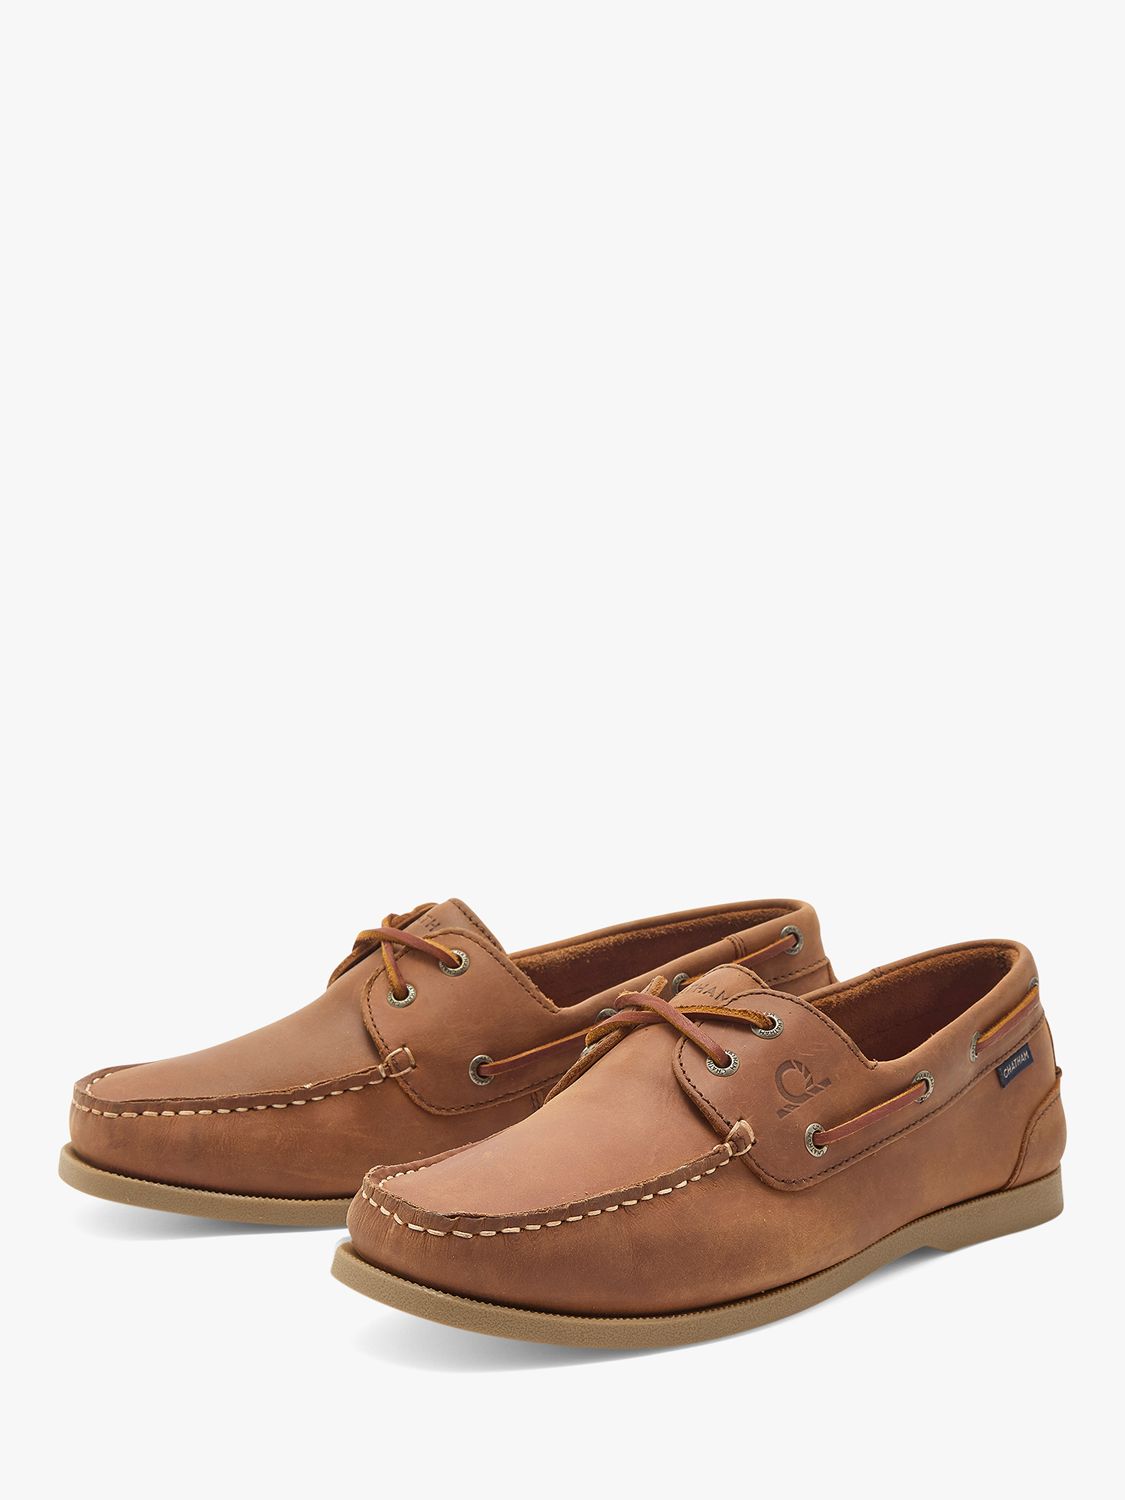 Chatham Galley II Leather Boat Shoes, Dark Tan, 7